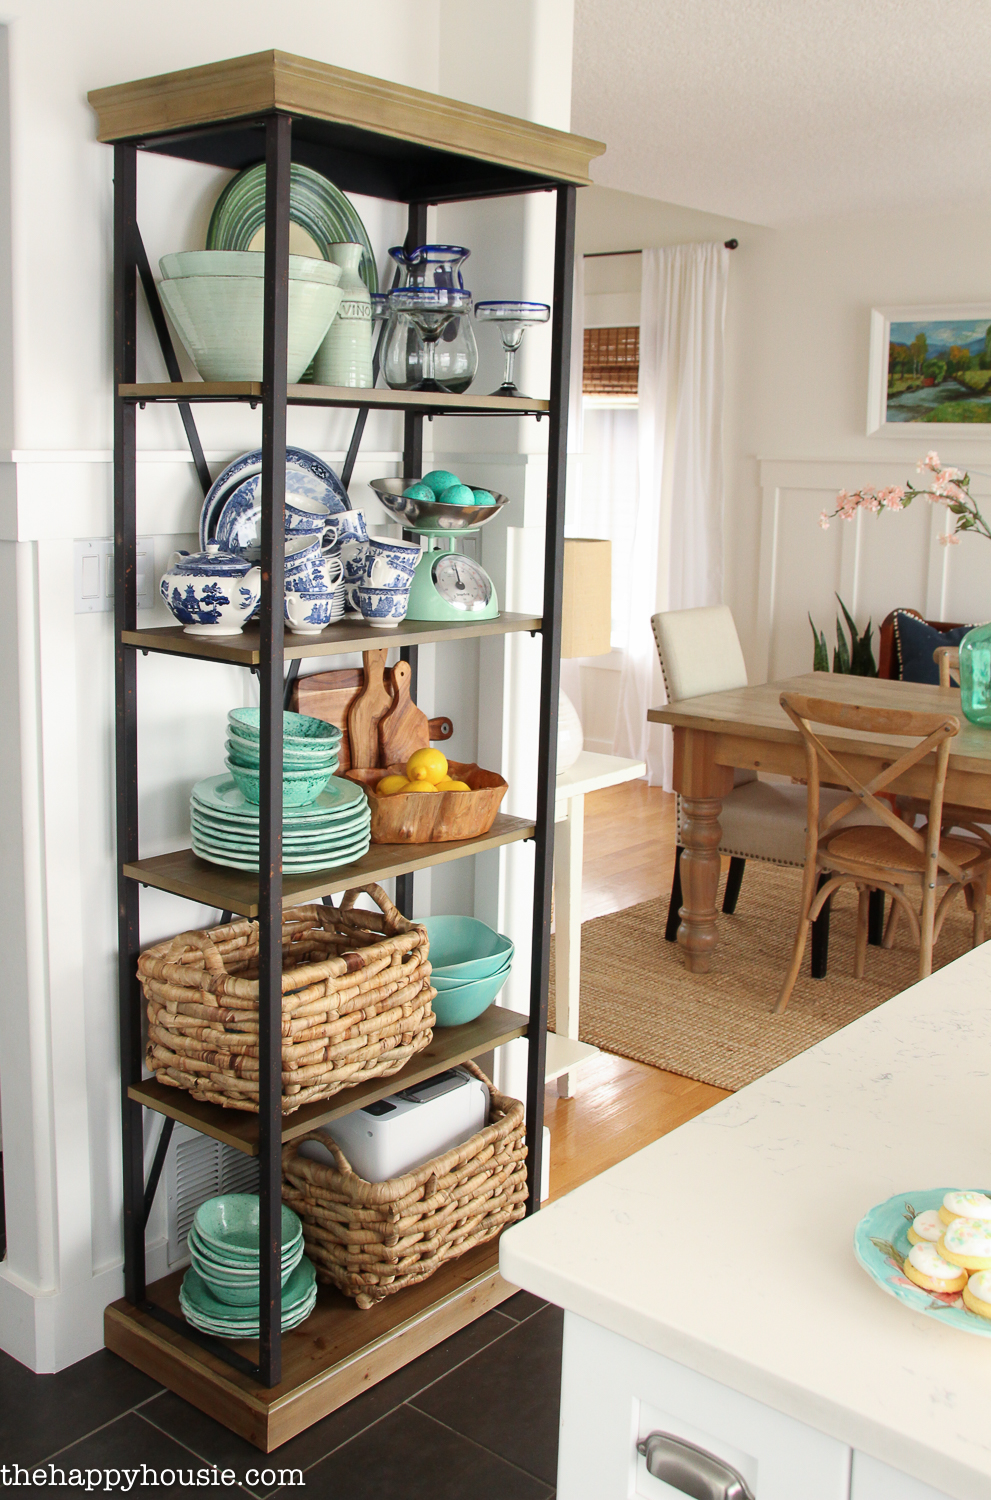 Using an Etagere Shelf for Kitchen Storage &amp; Display | The ...